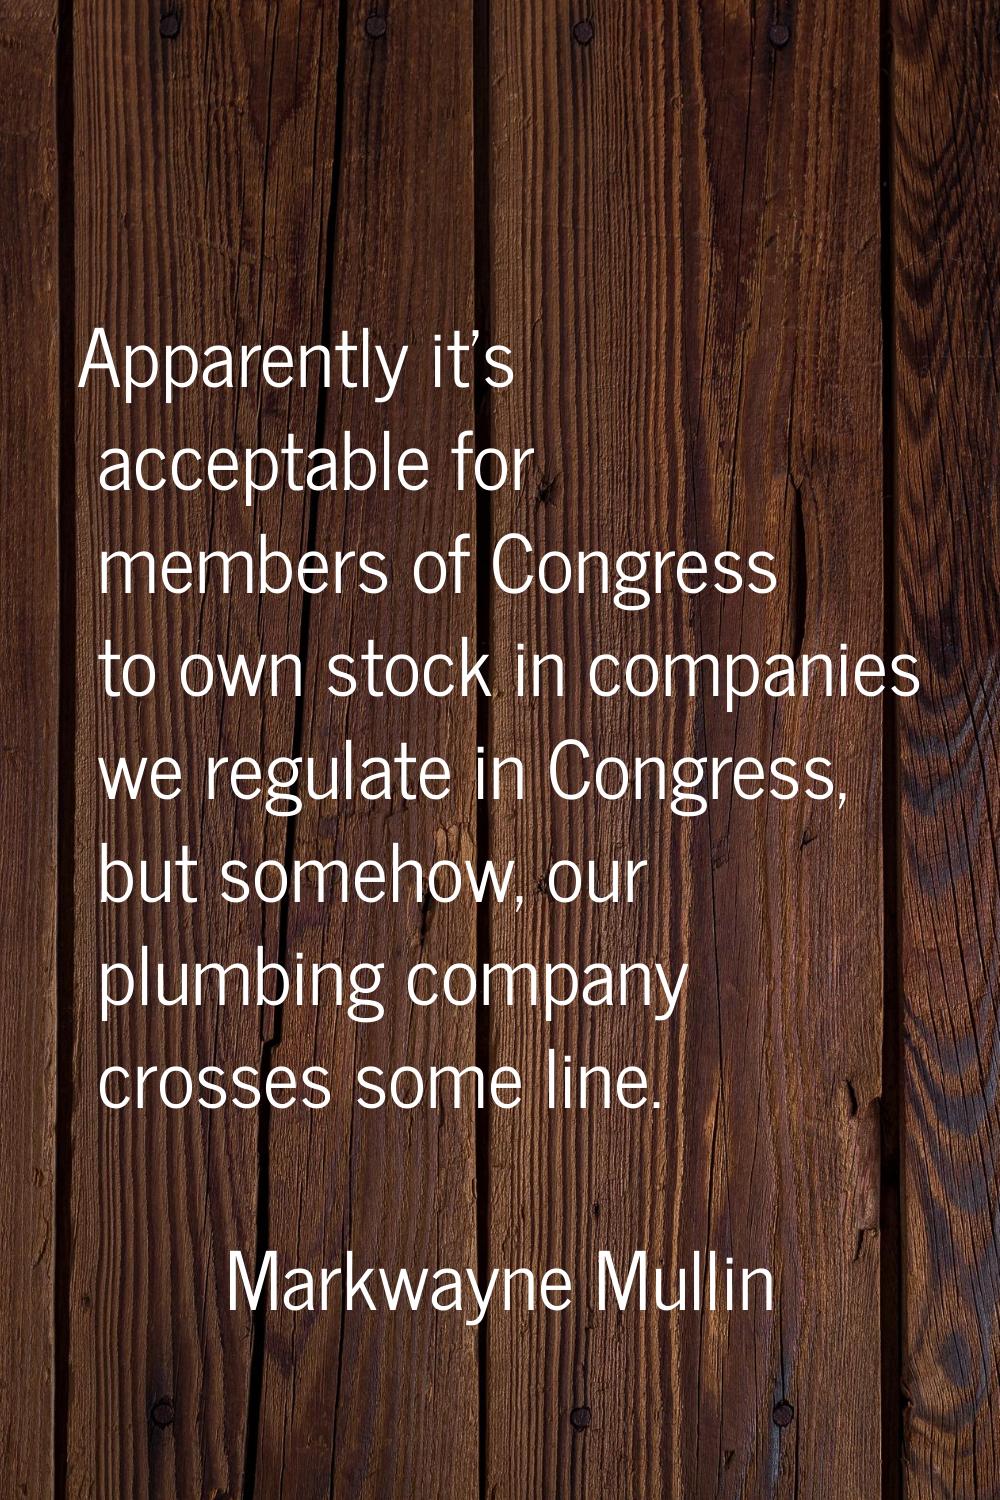 Apparently it's acceptable for members of Congress to own stock in companies we regulate in Congres